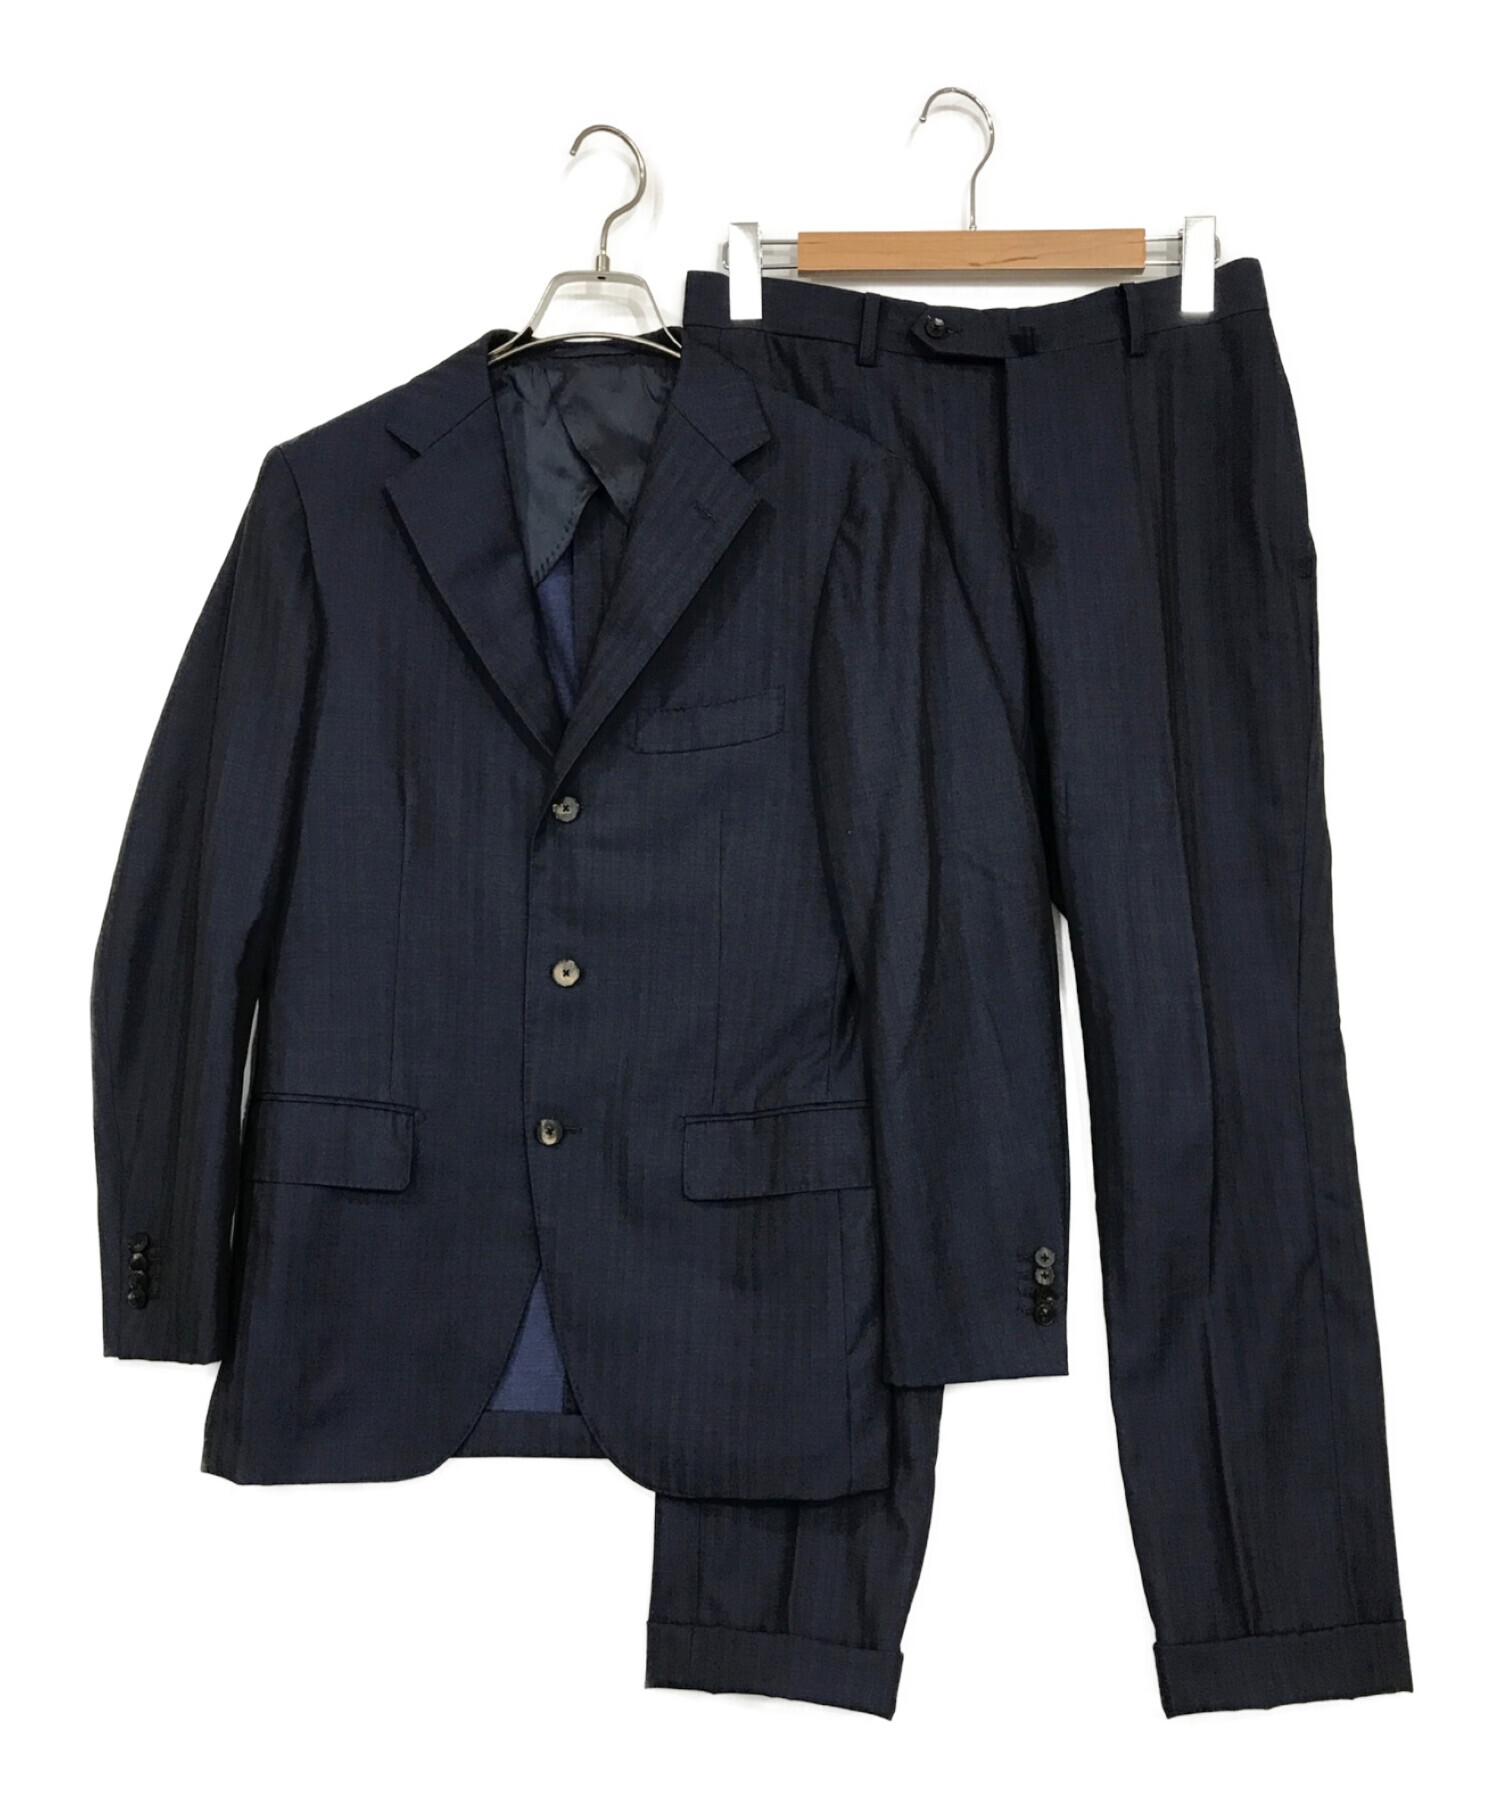 THE SUIT COMPANY スーツセットアップ